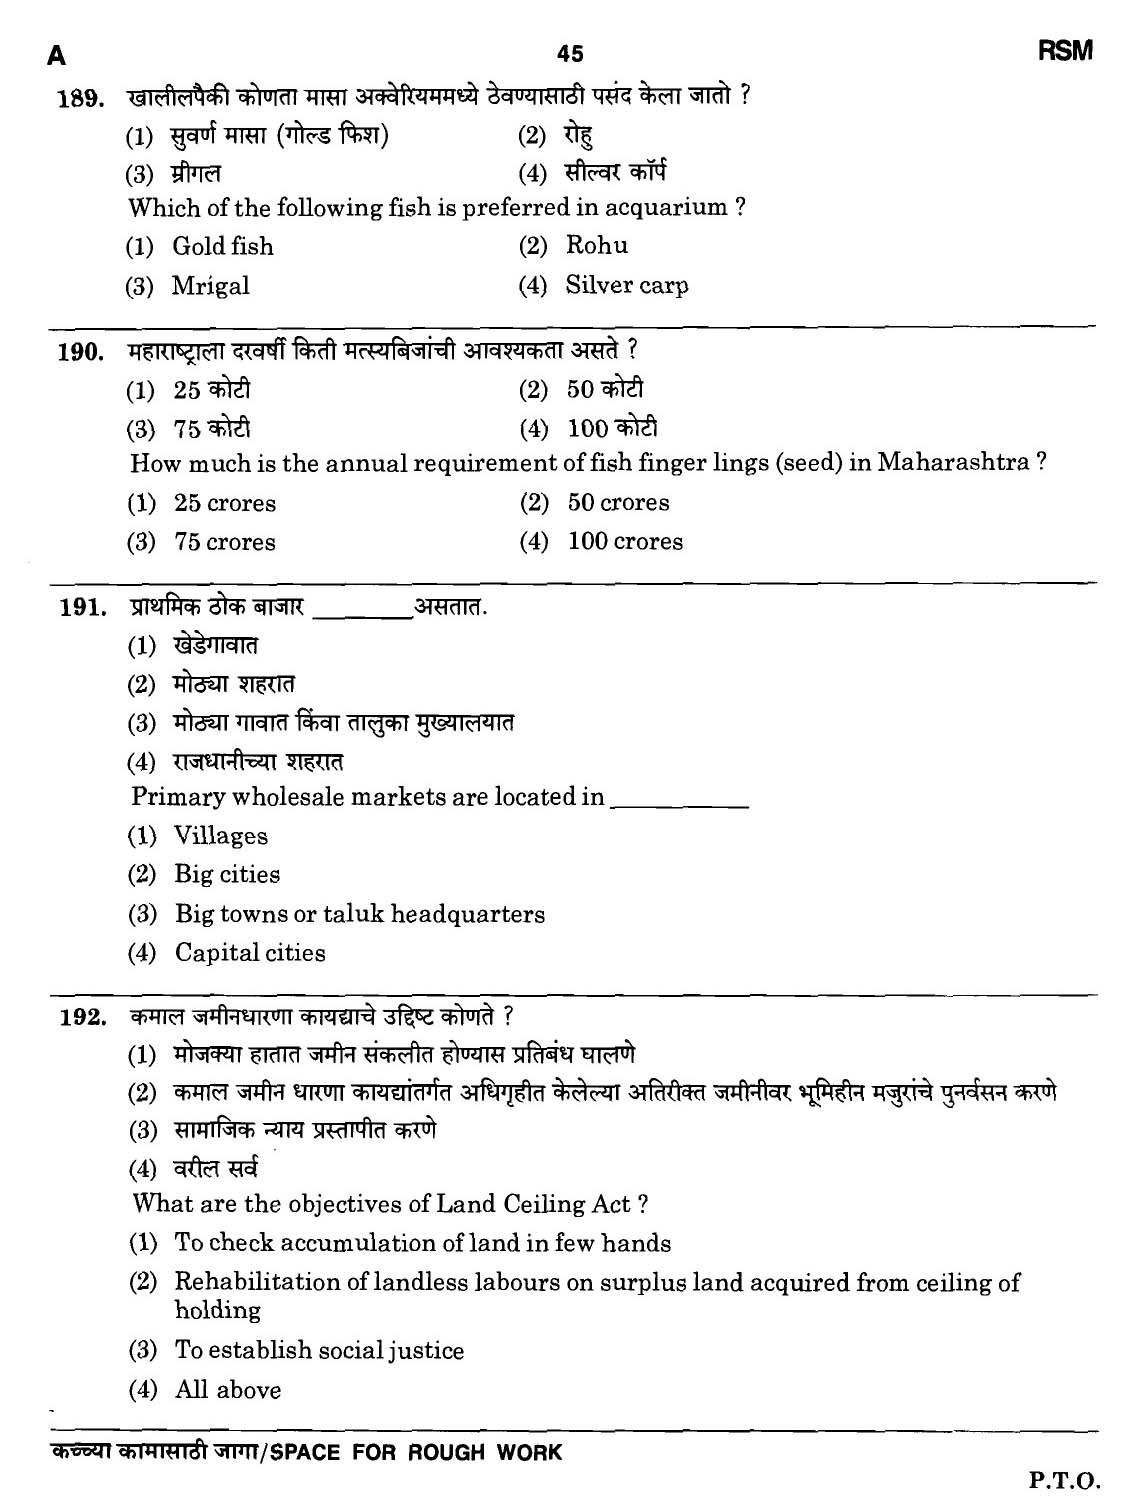 MPSC Agricultural Services Preliminary Exam 2011 Question Paper 44